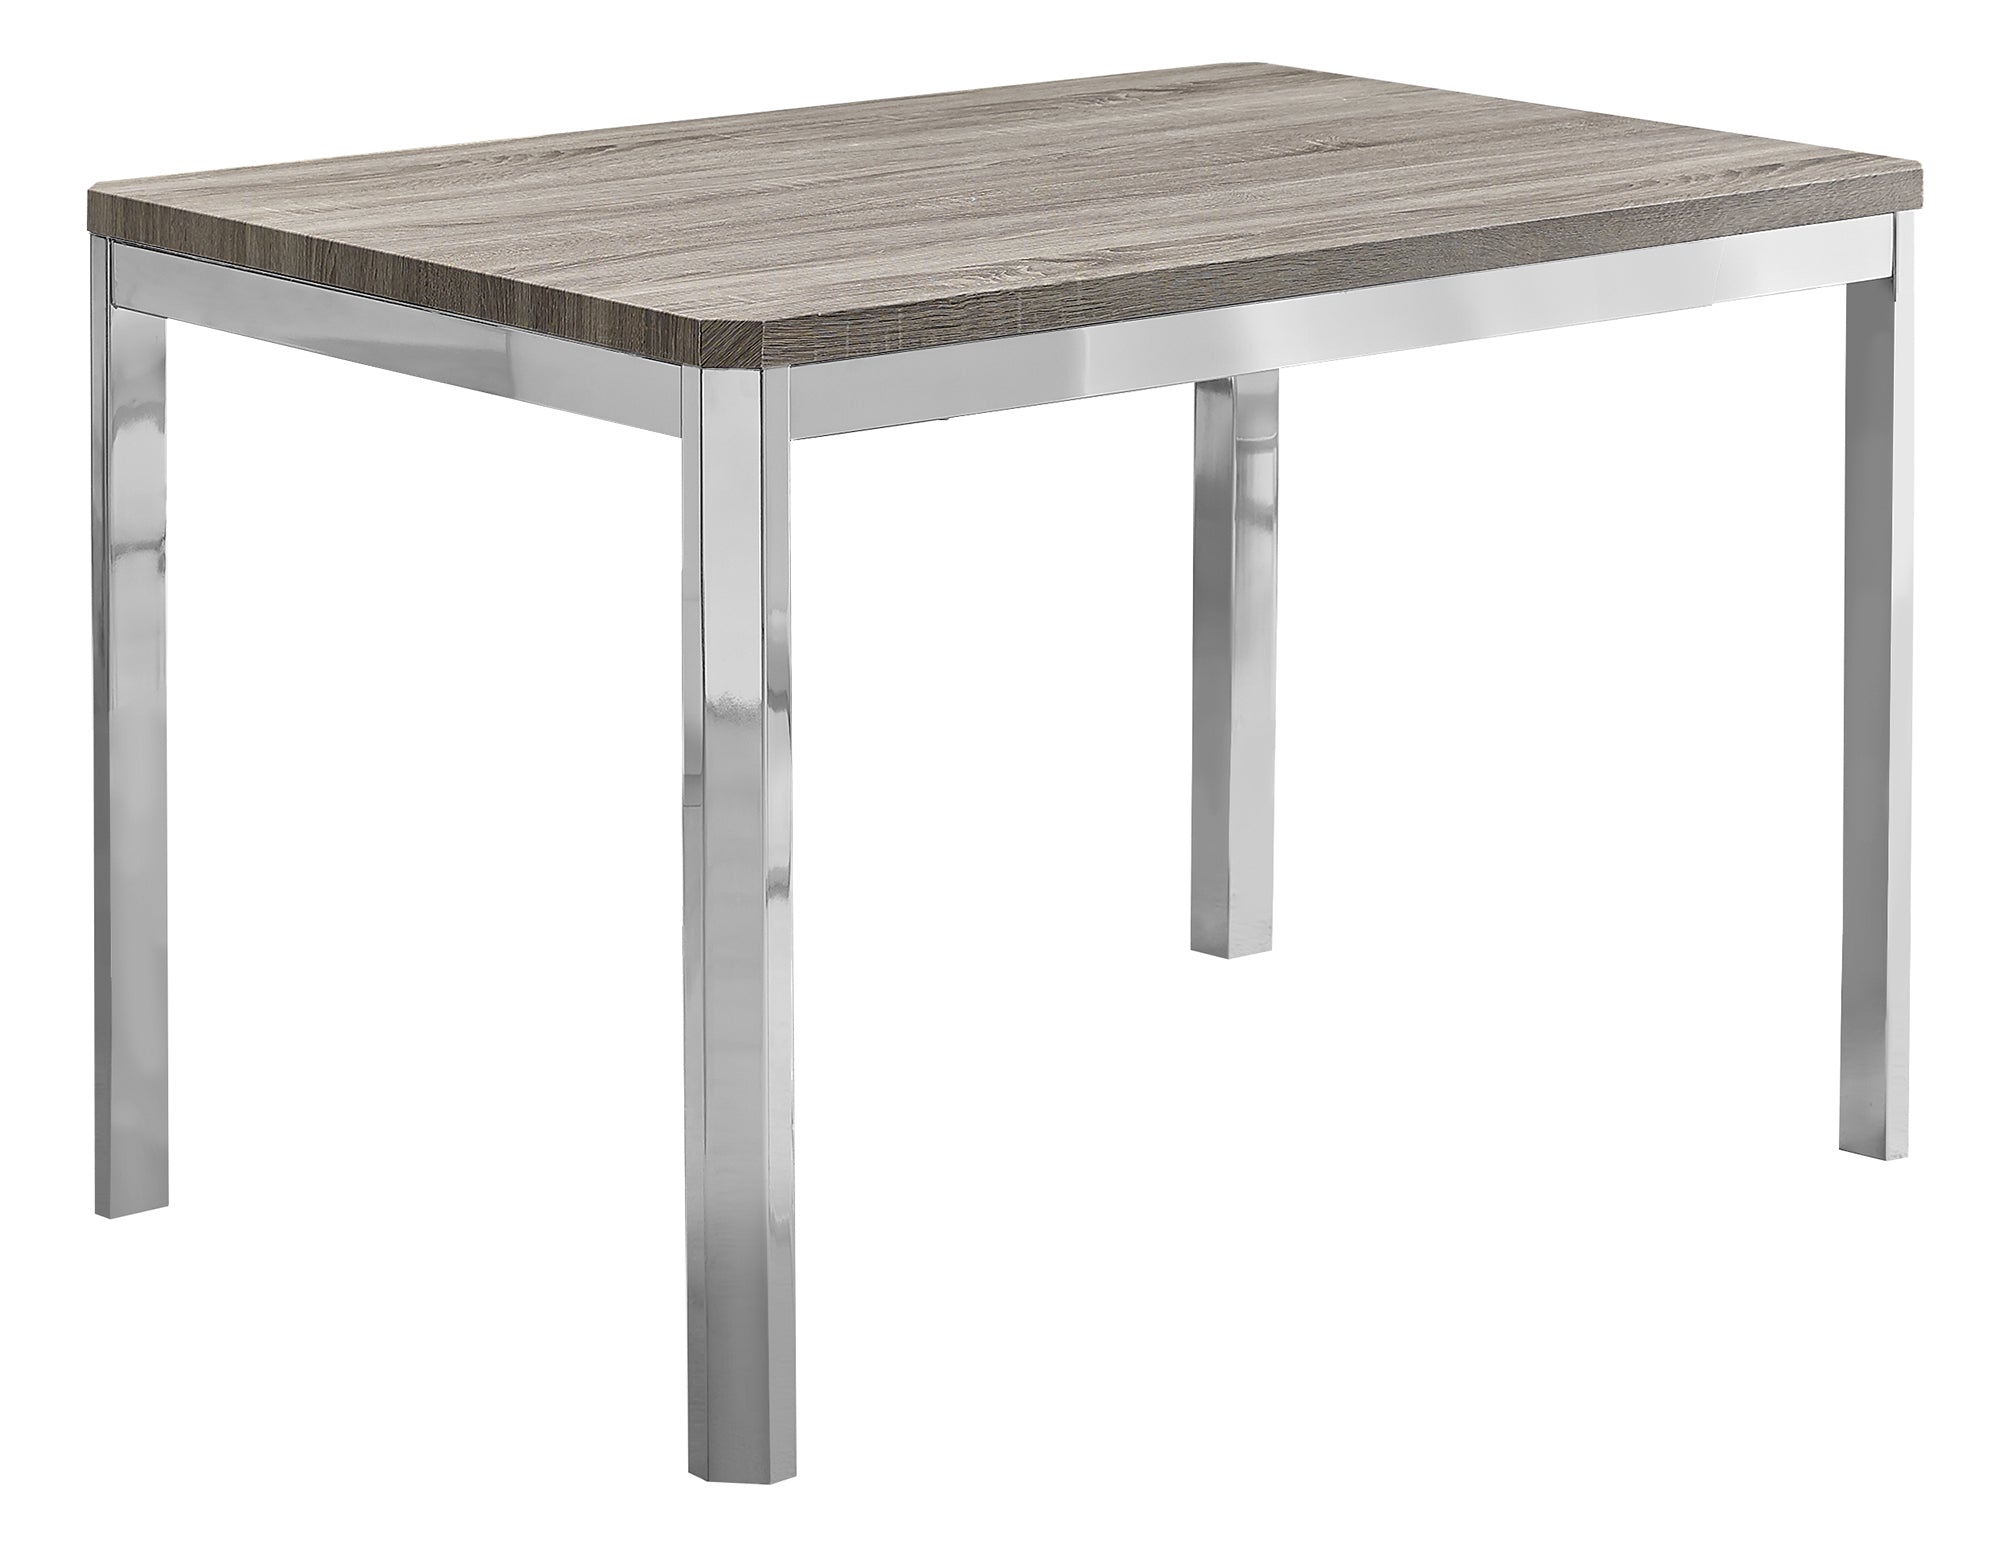 32" Taupe and Silver Metal Dining Table